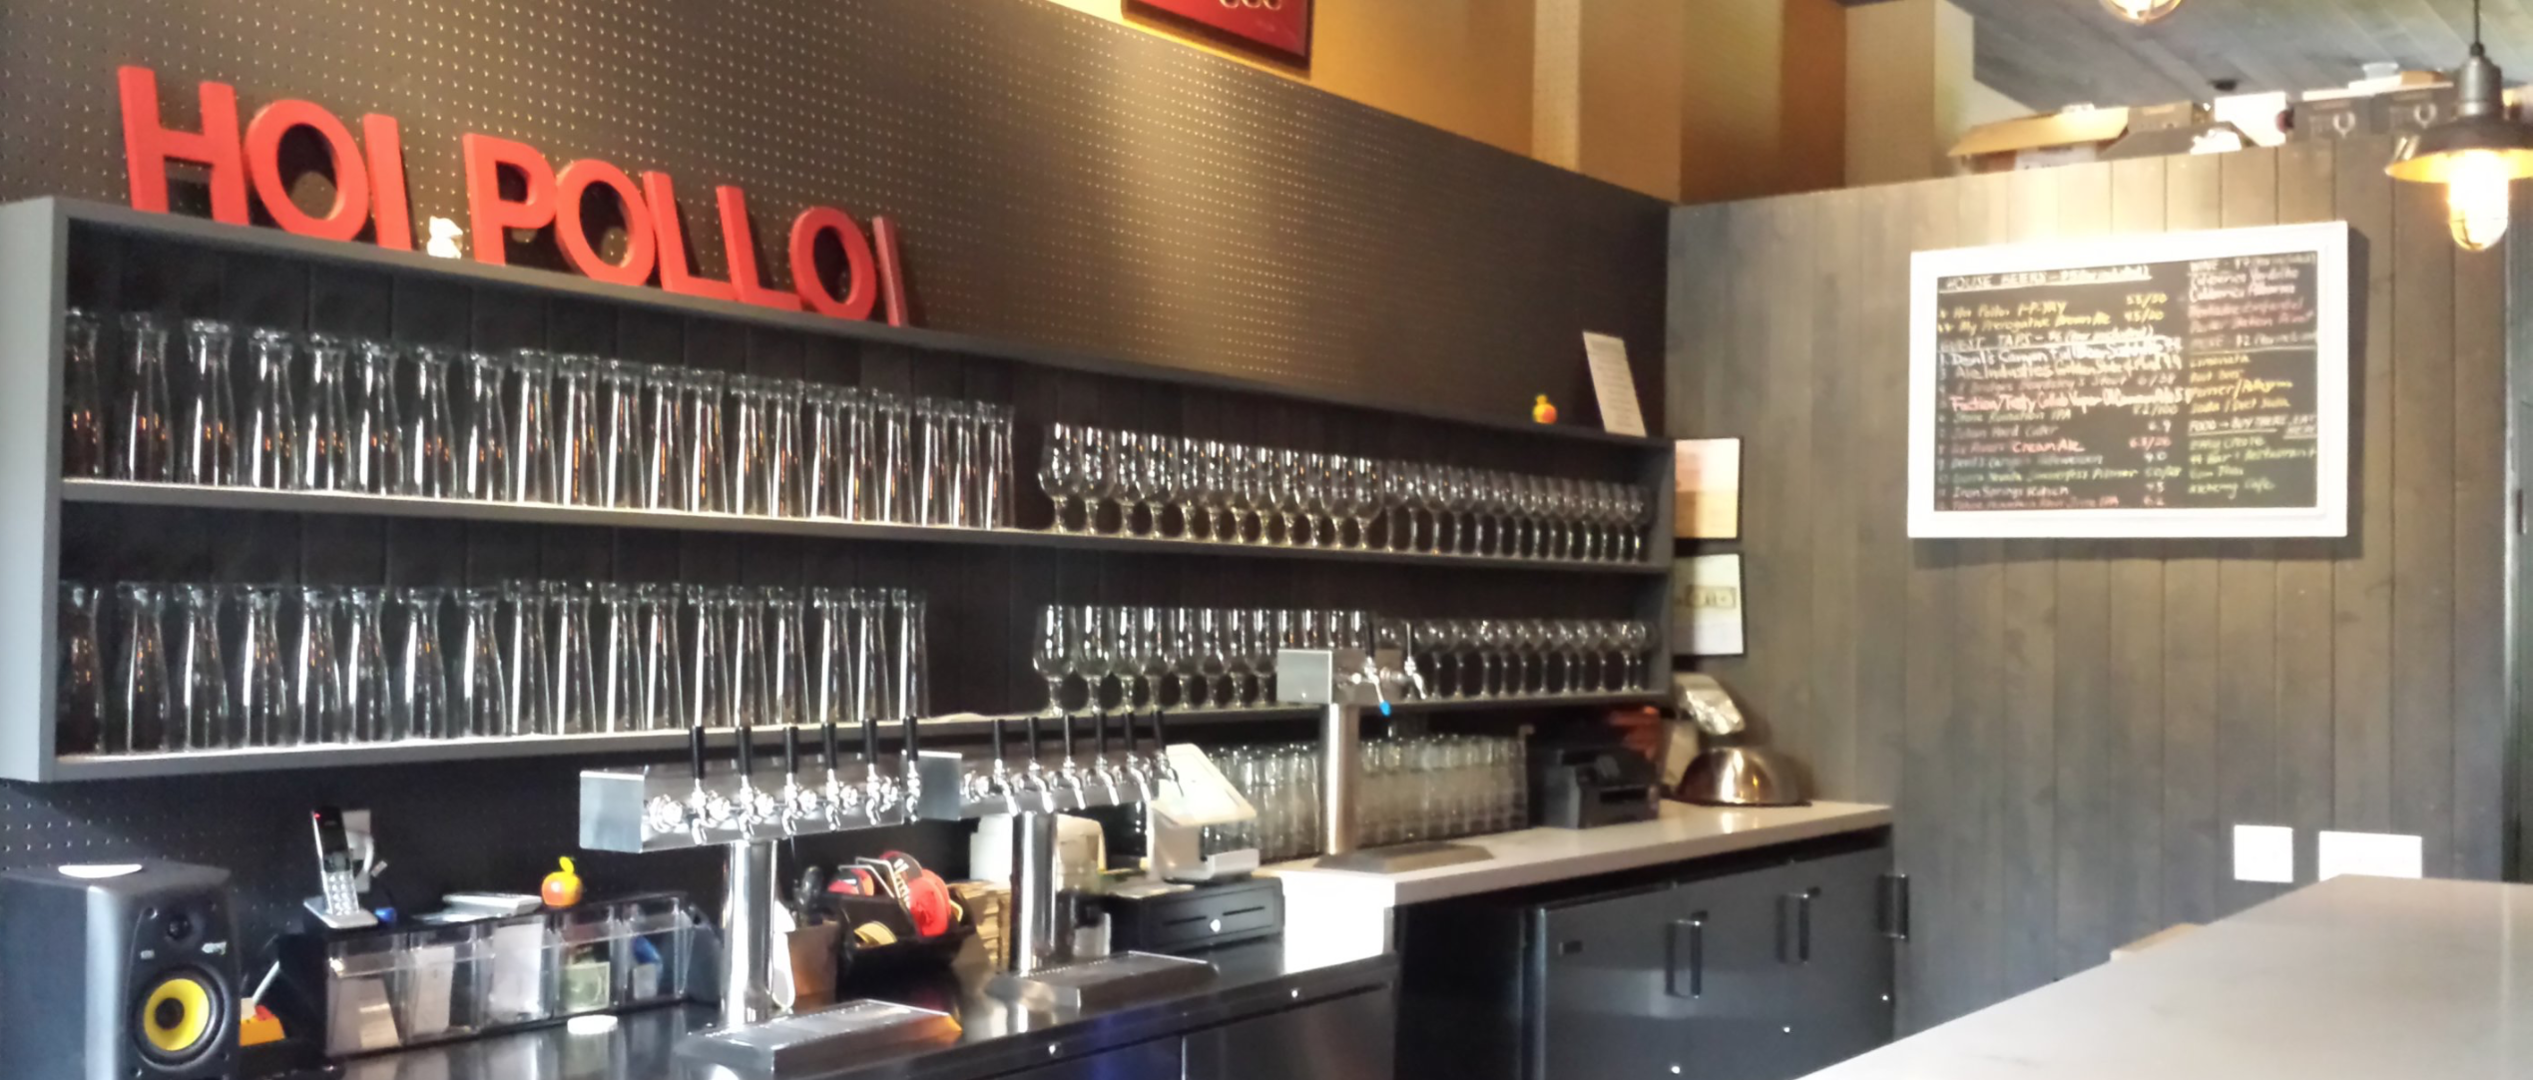 Hoi Polloi Brewing Taproom and Beat Lounge